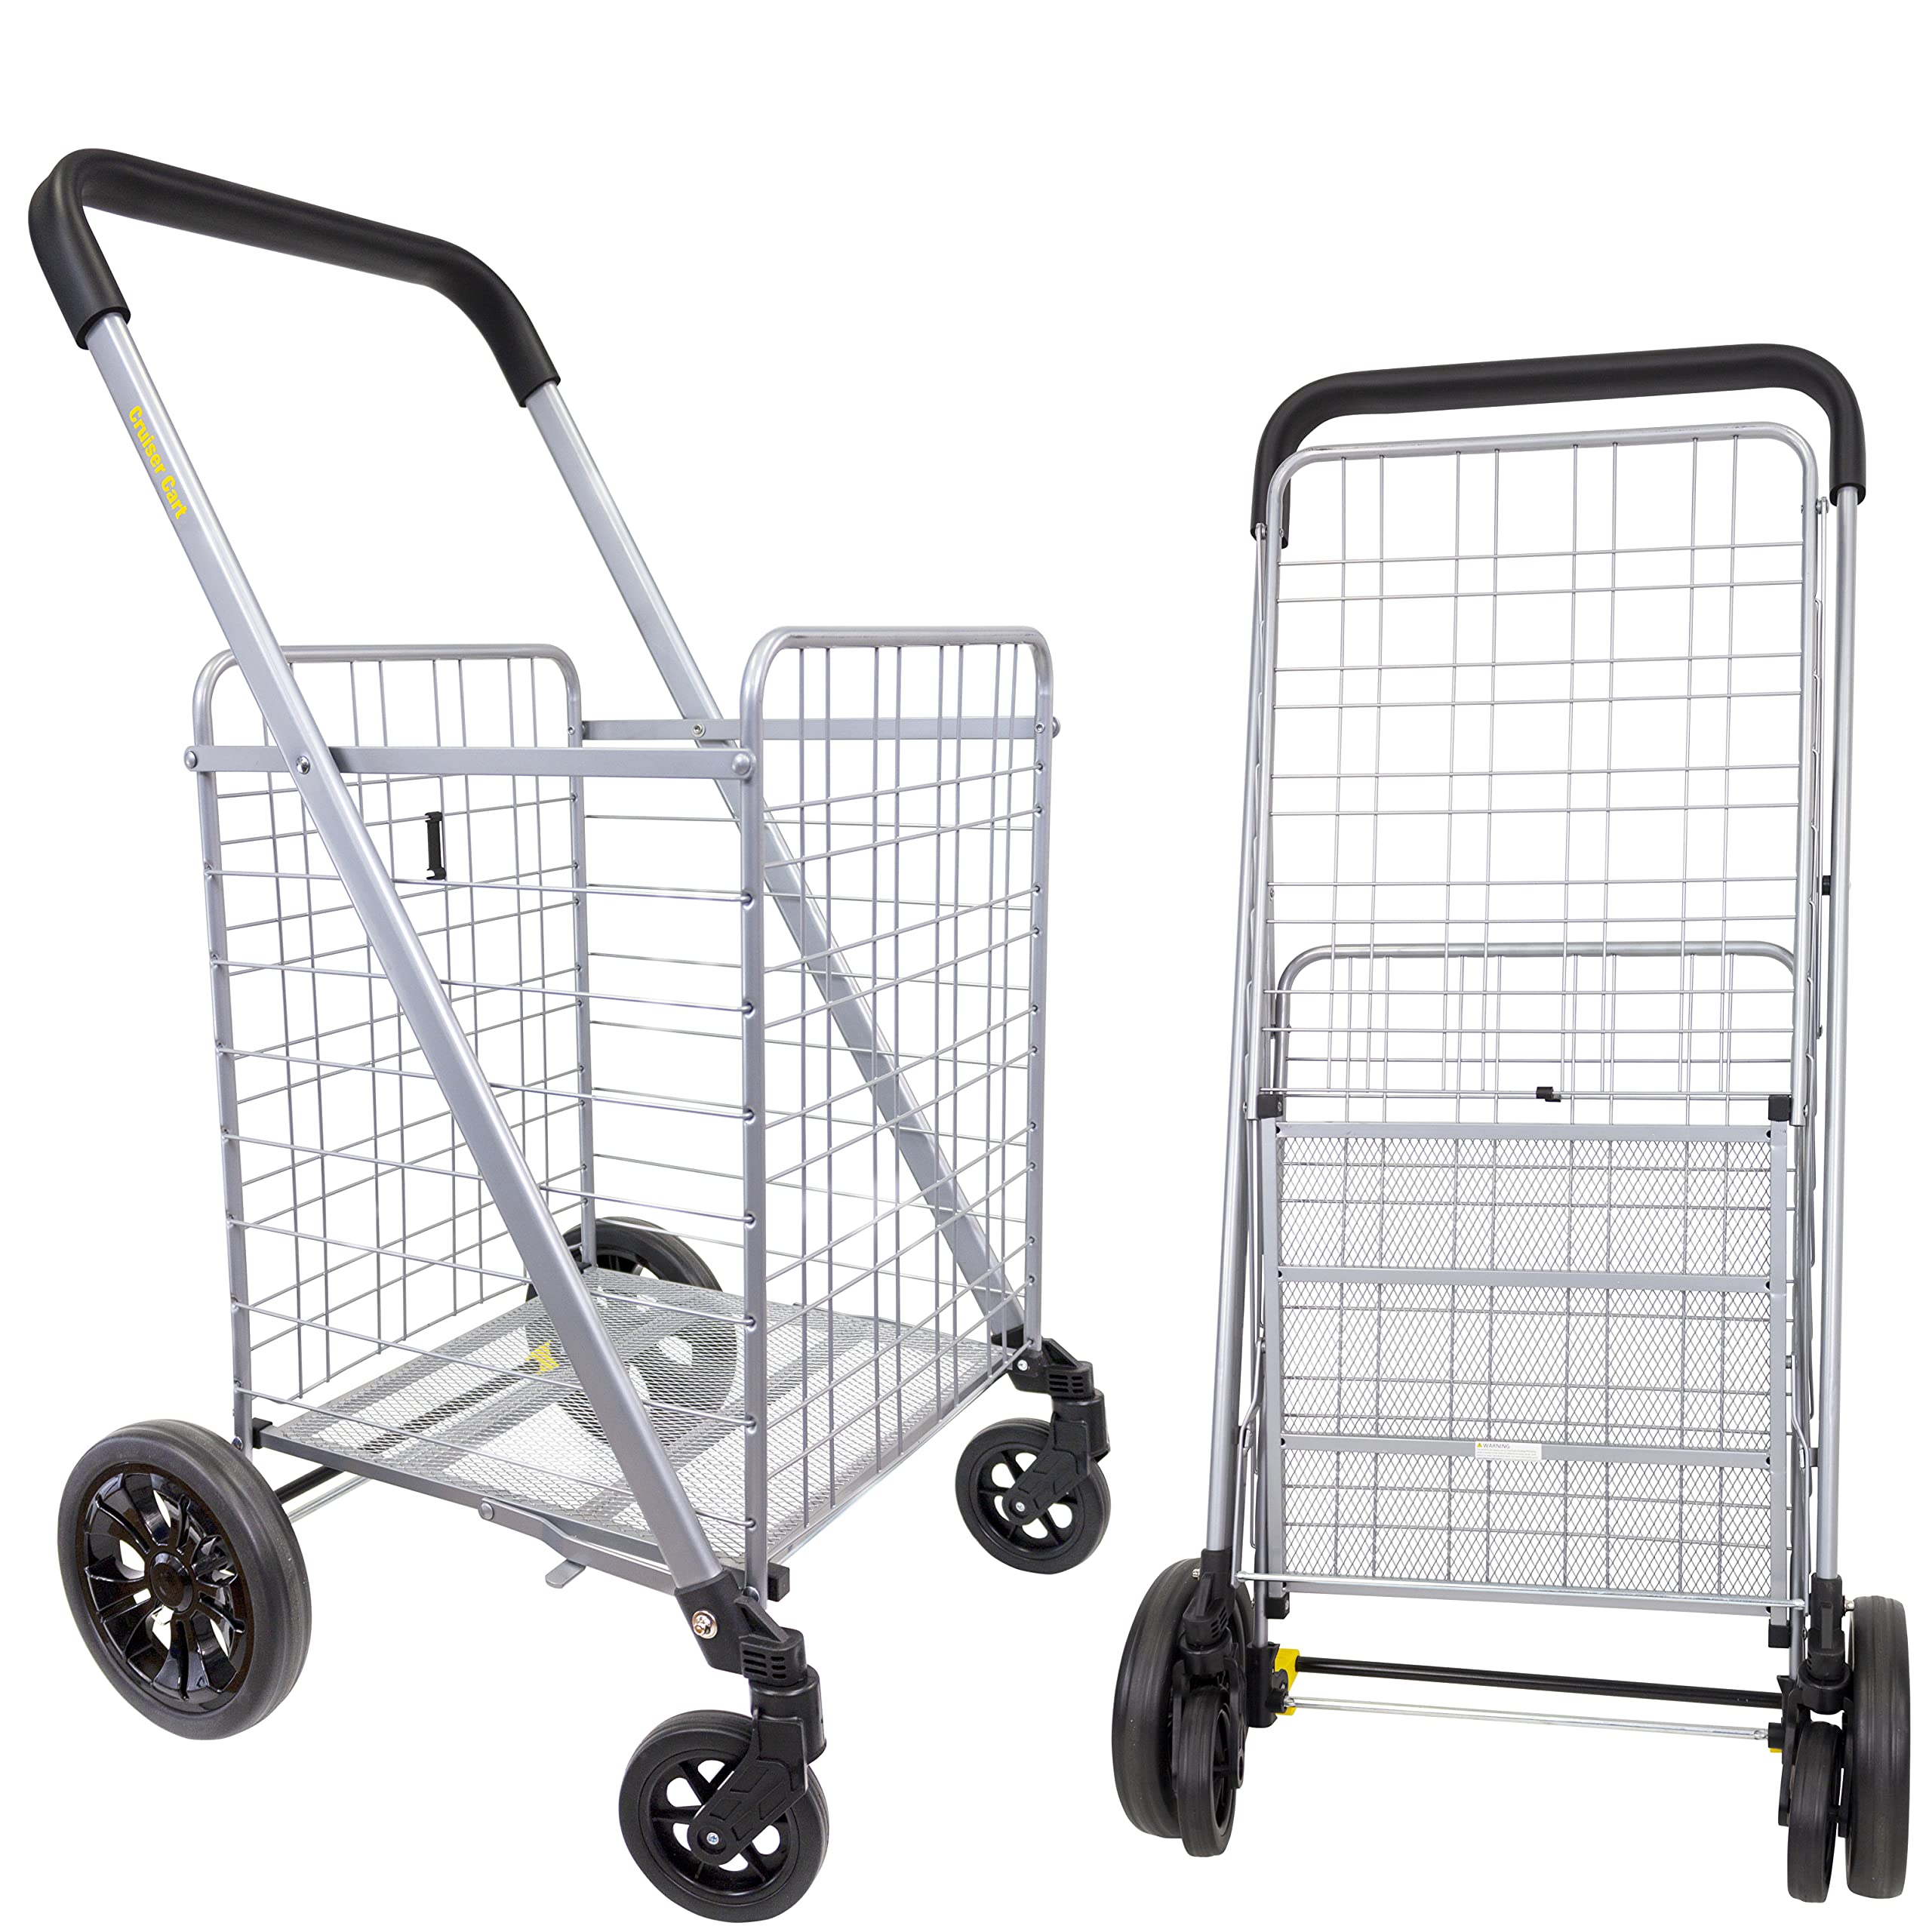 dbest products dbest prodicts Cruiser Cart